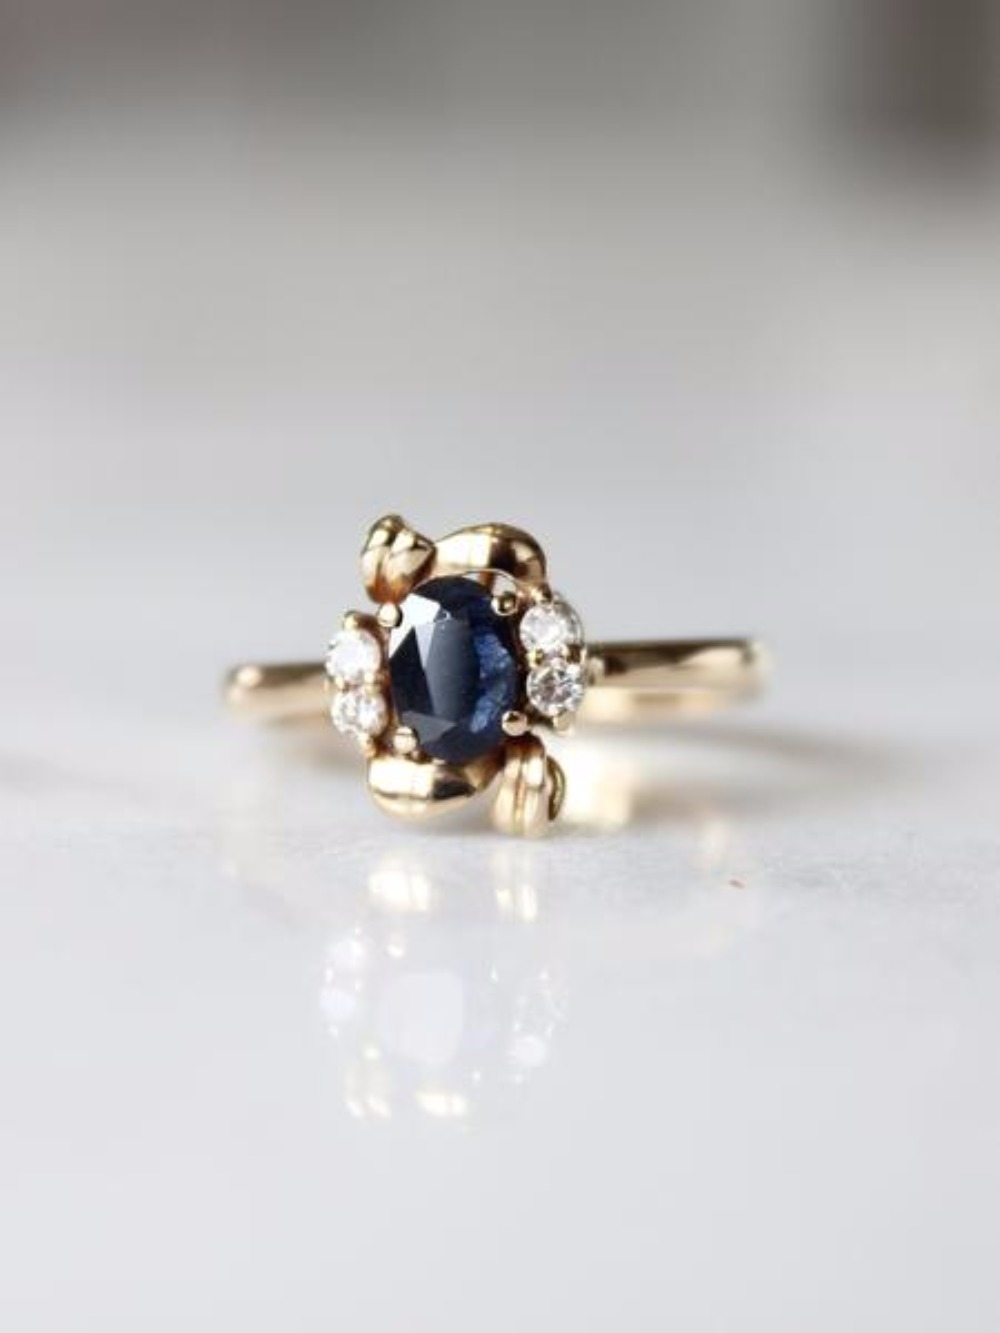 625349_have-you-ever-seen-a-sapphire-so